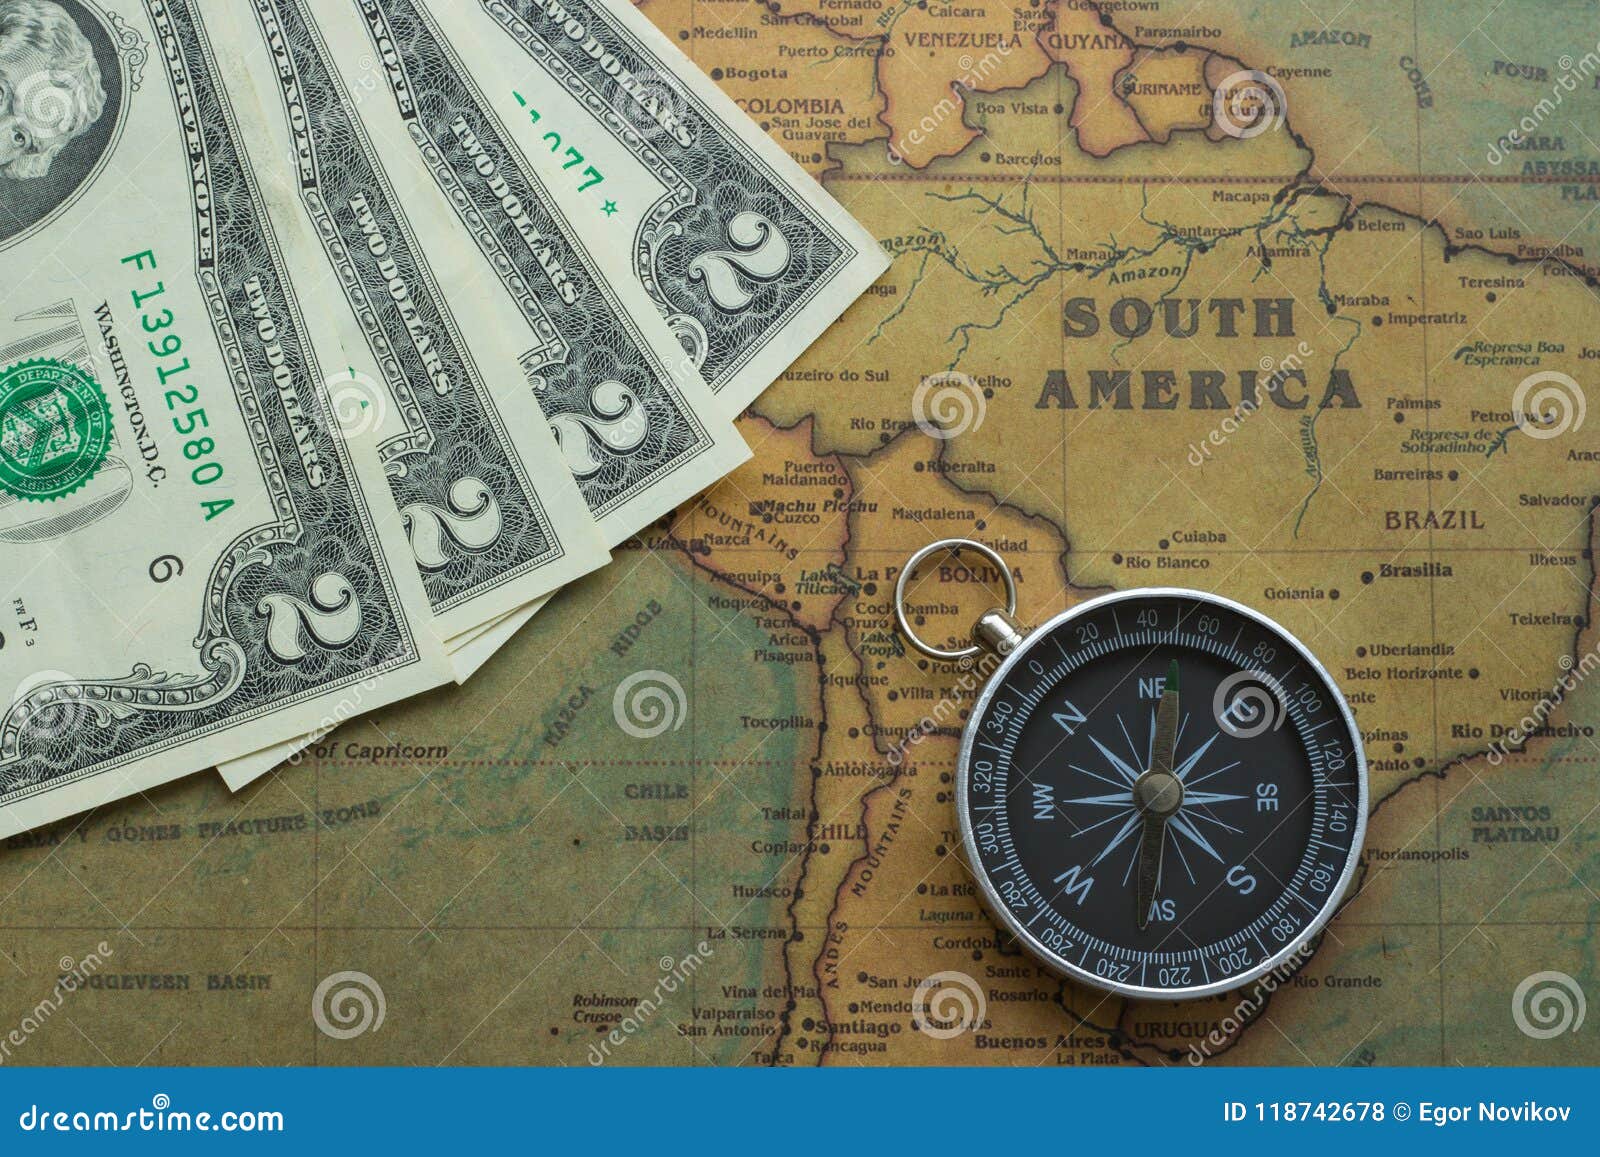 vintage map of south america with two dolor bills and a compass, close-up